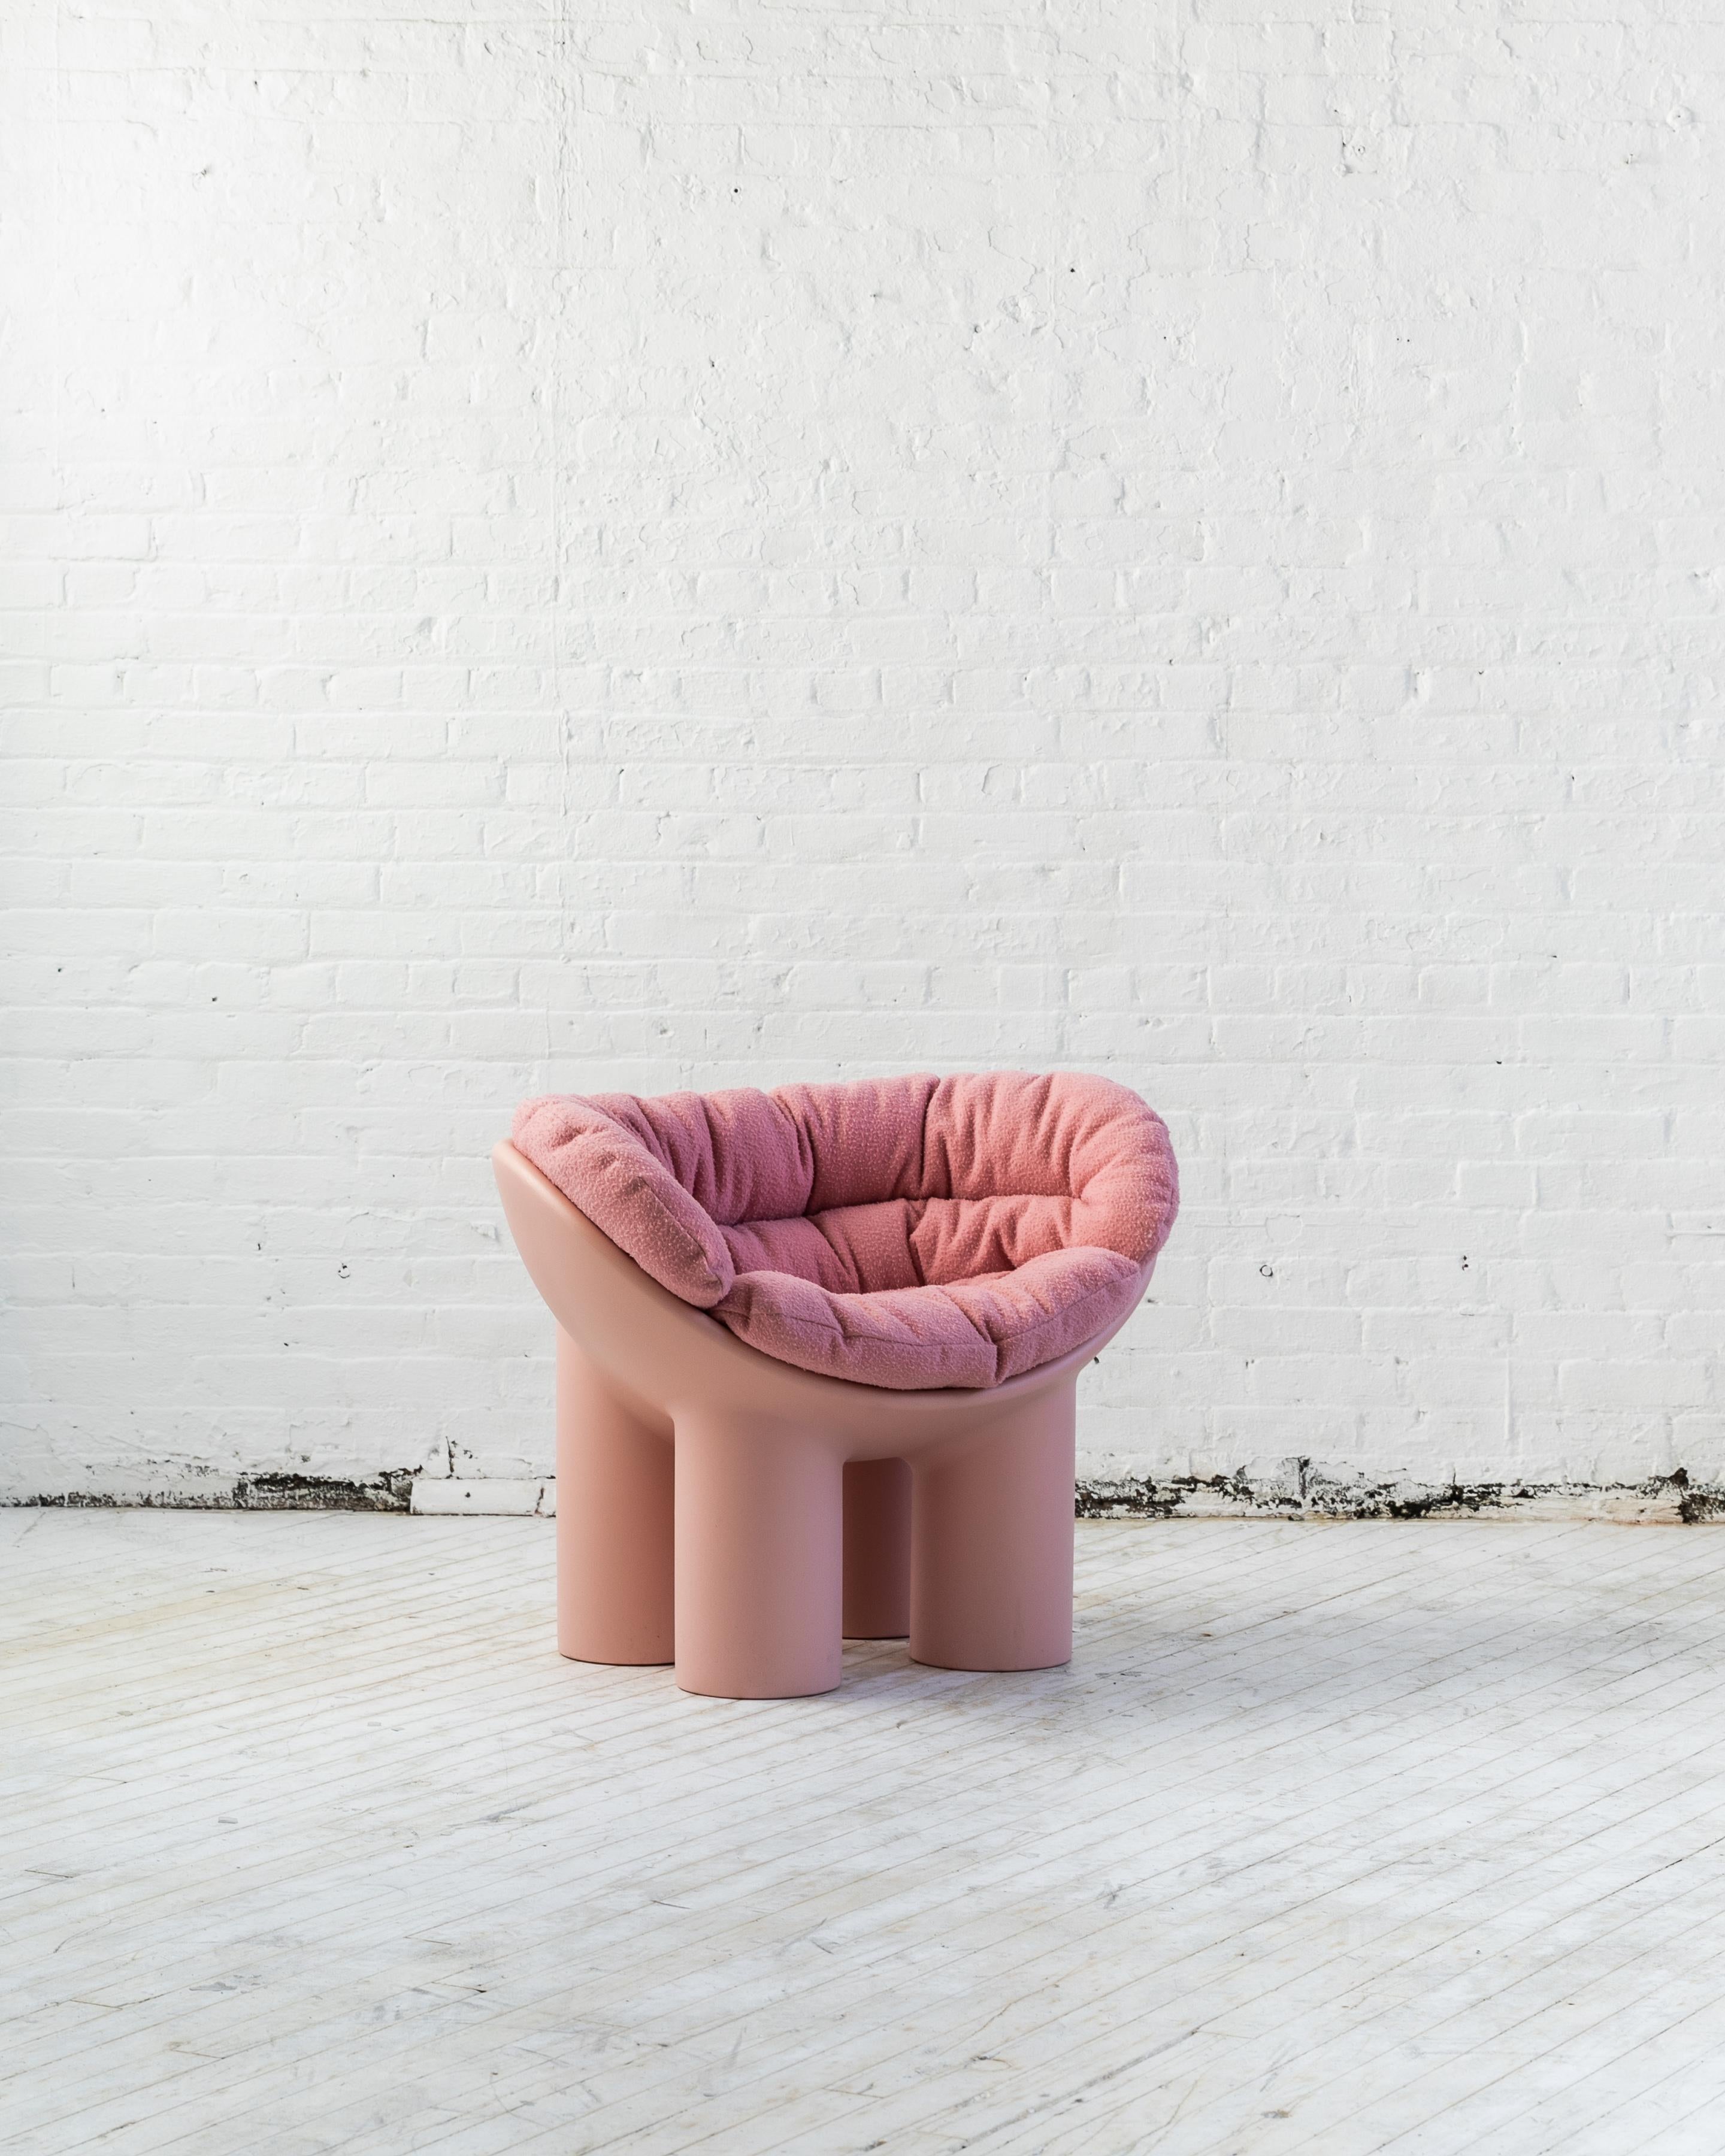 Duplex launches DUPLEX X CASENTINO. The iconic Roly Poly armchair designed by Faye Toogood and manufactured by Driade, with the exclusive cushions in the ancient Casentino cloth from Tuscany, Italy.

Casentino is a rugged and compact wool fabric